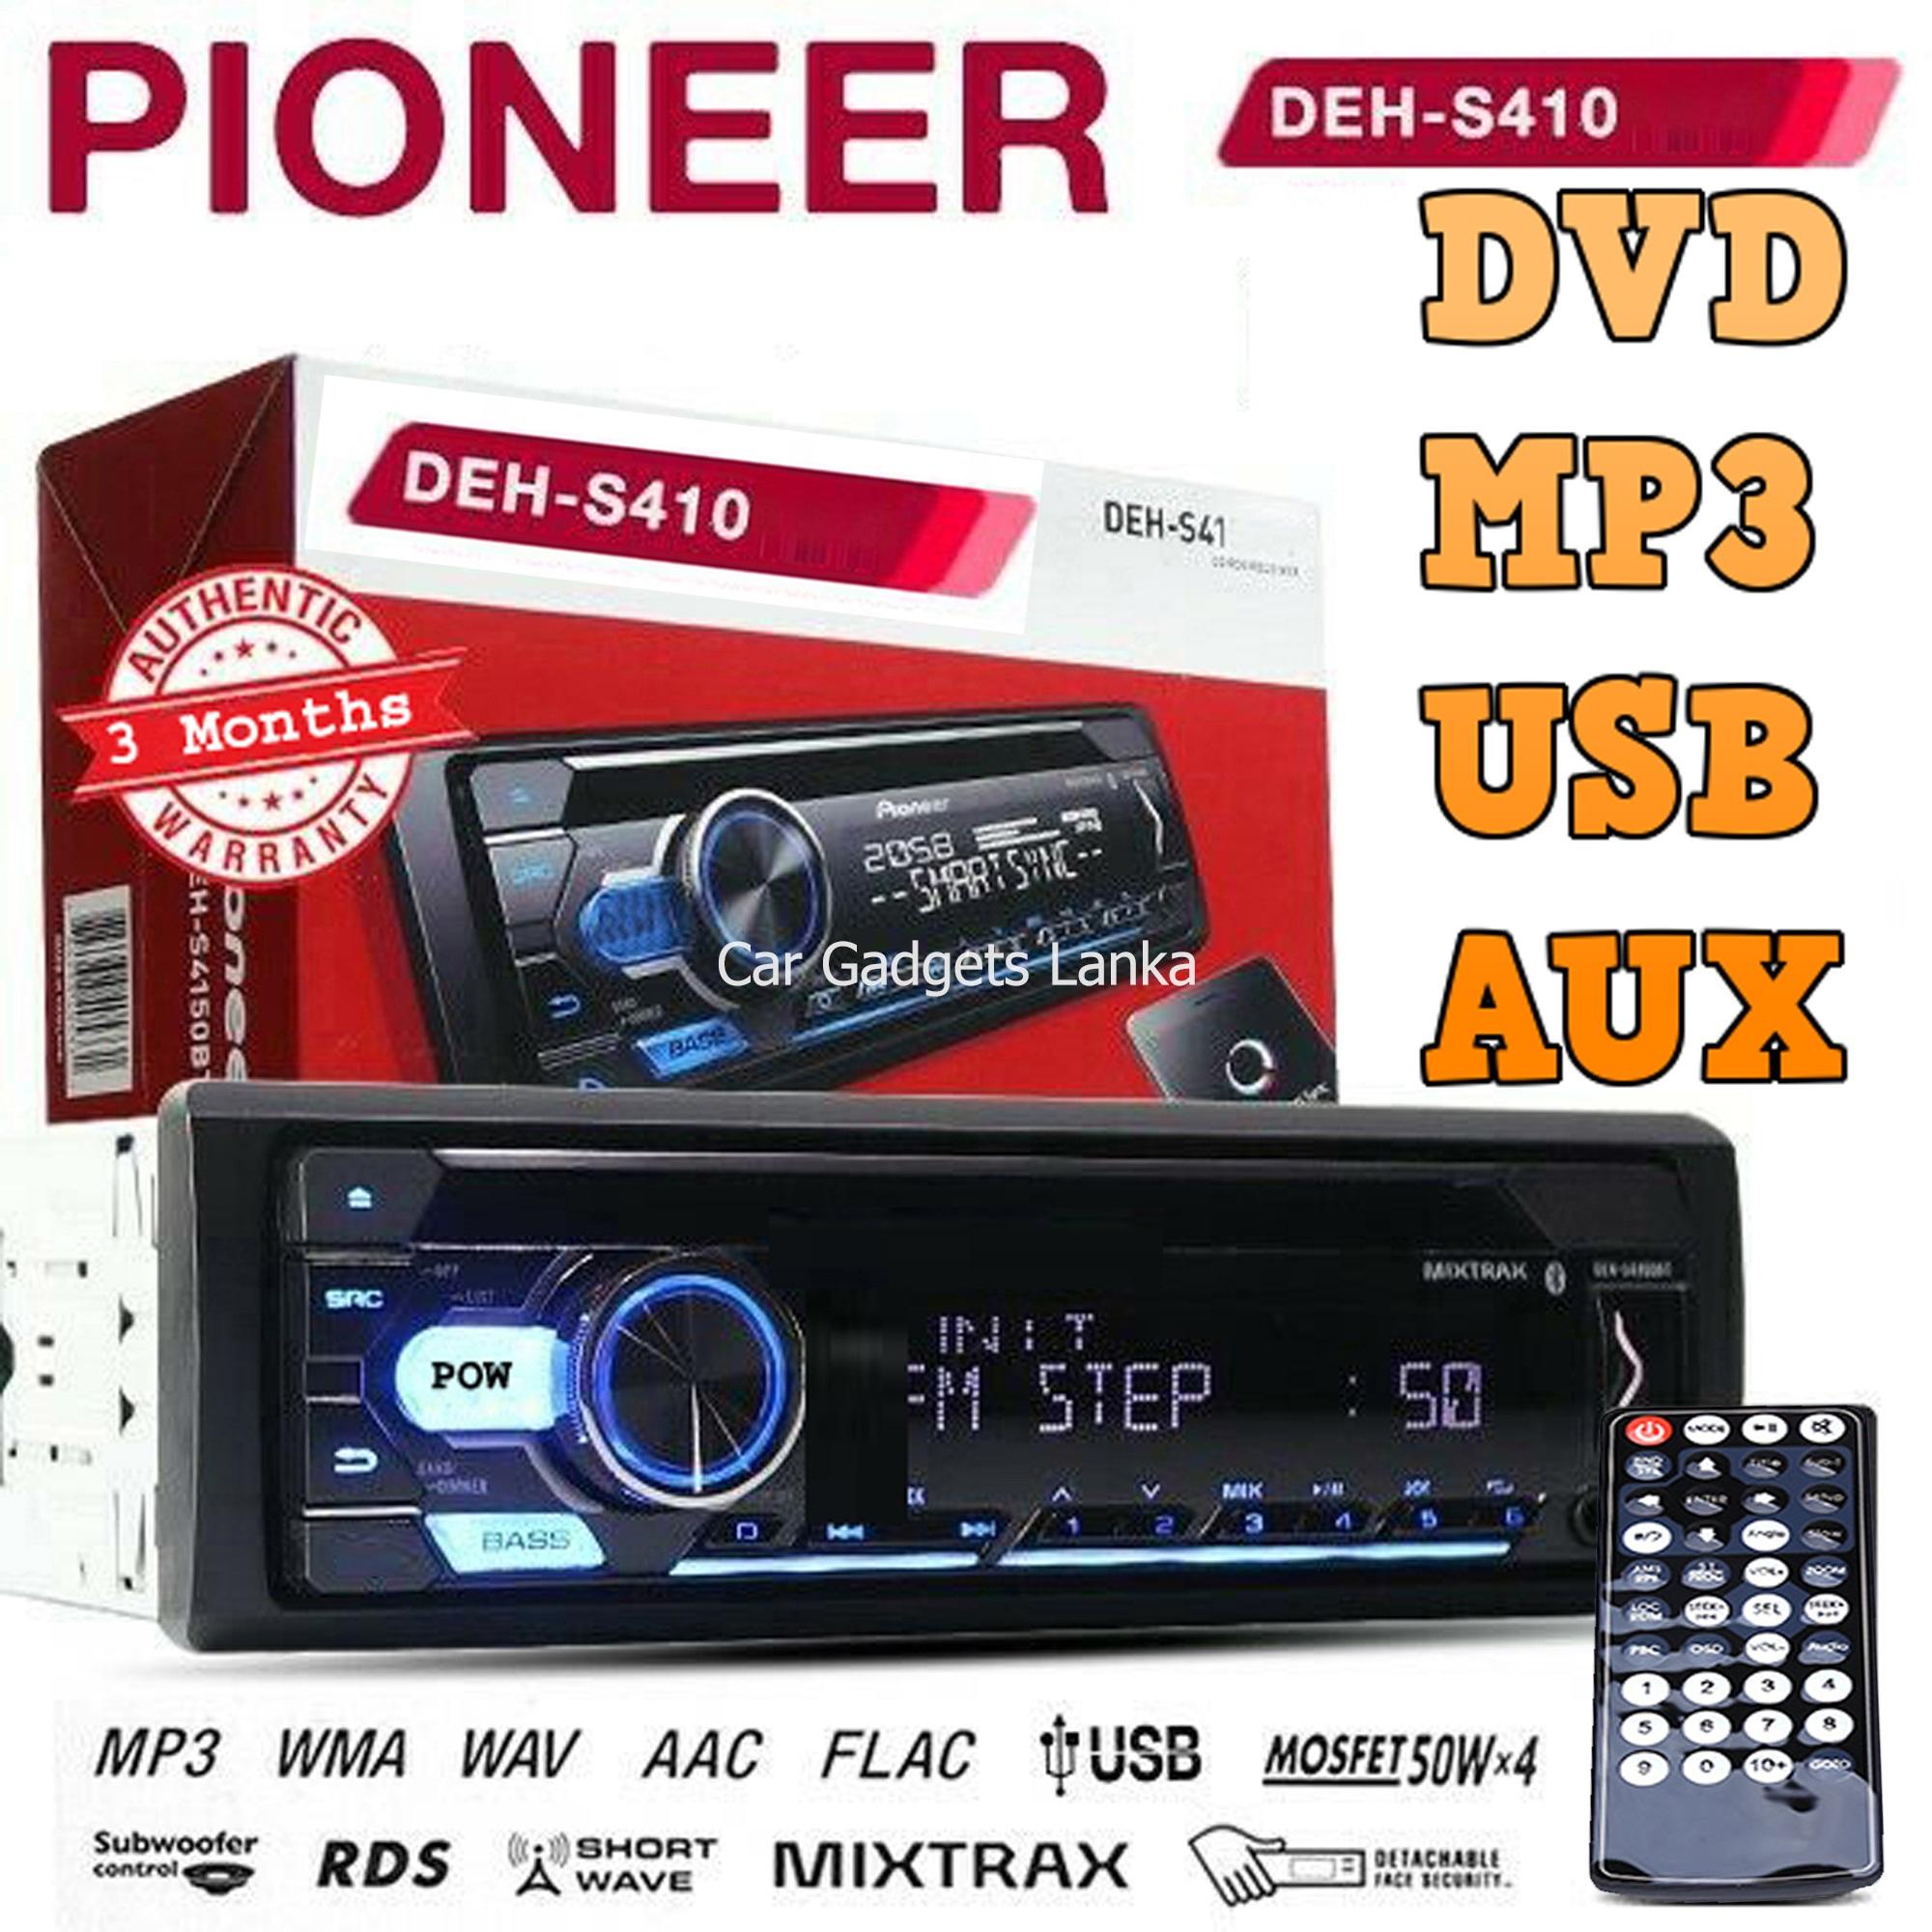 Pioneer Car Stereo Fm Radio Dvd Vcd Cd Player With Mp3 Usb Aux Deh S410 Buy Sell Online Best Prices In Srilanka Daraz Lk